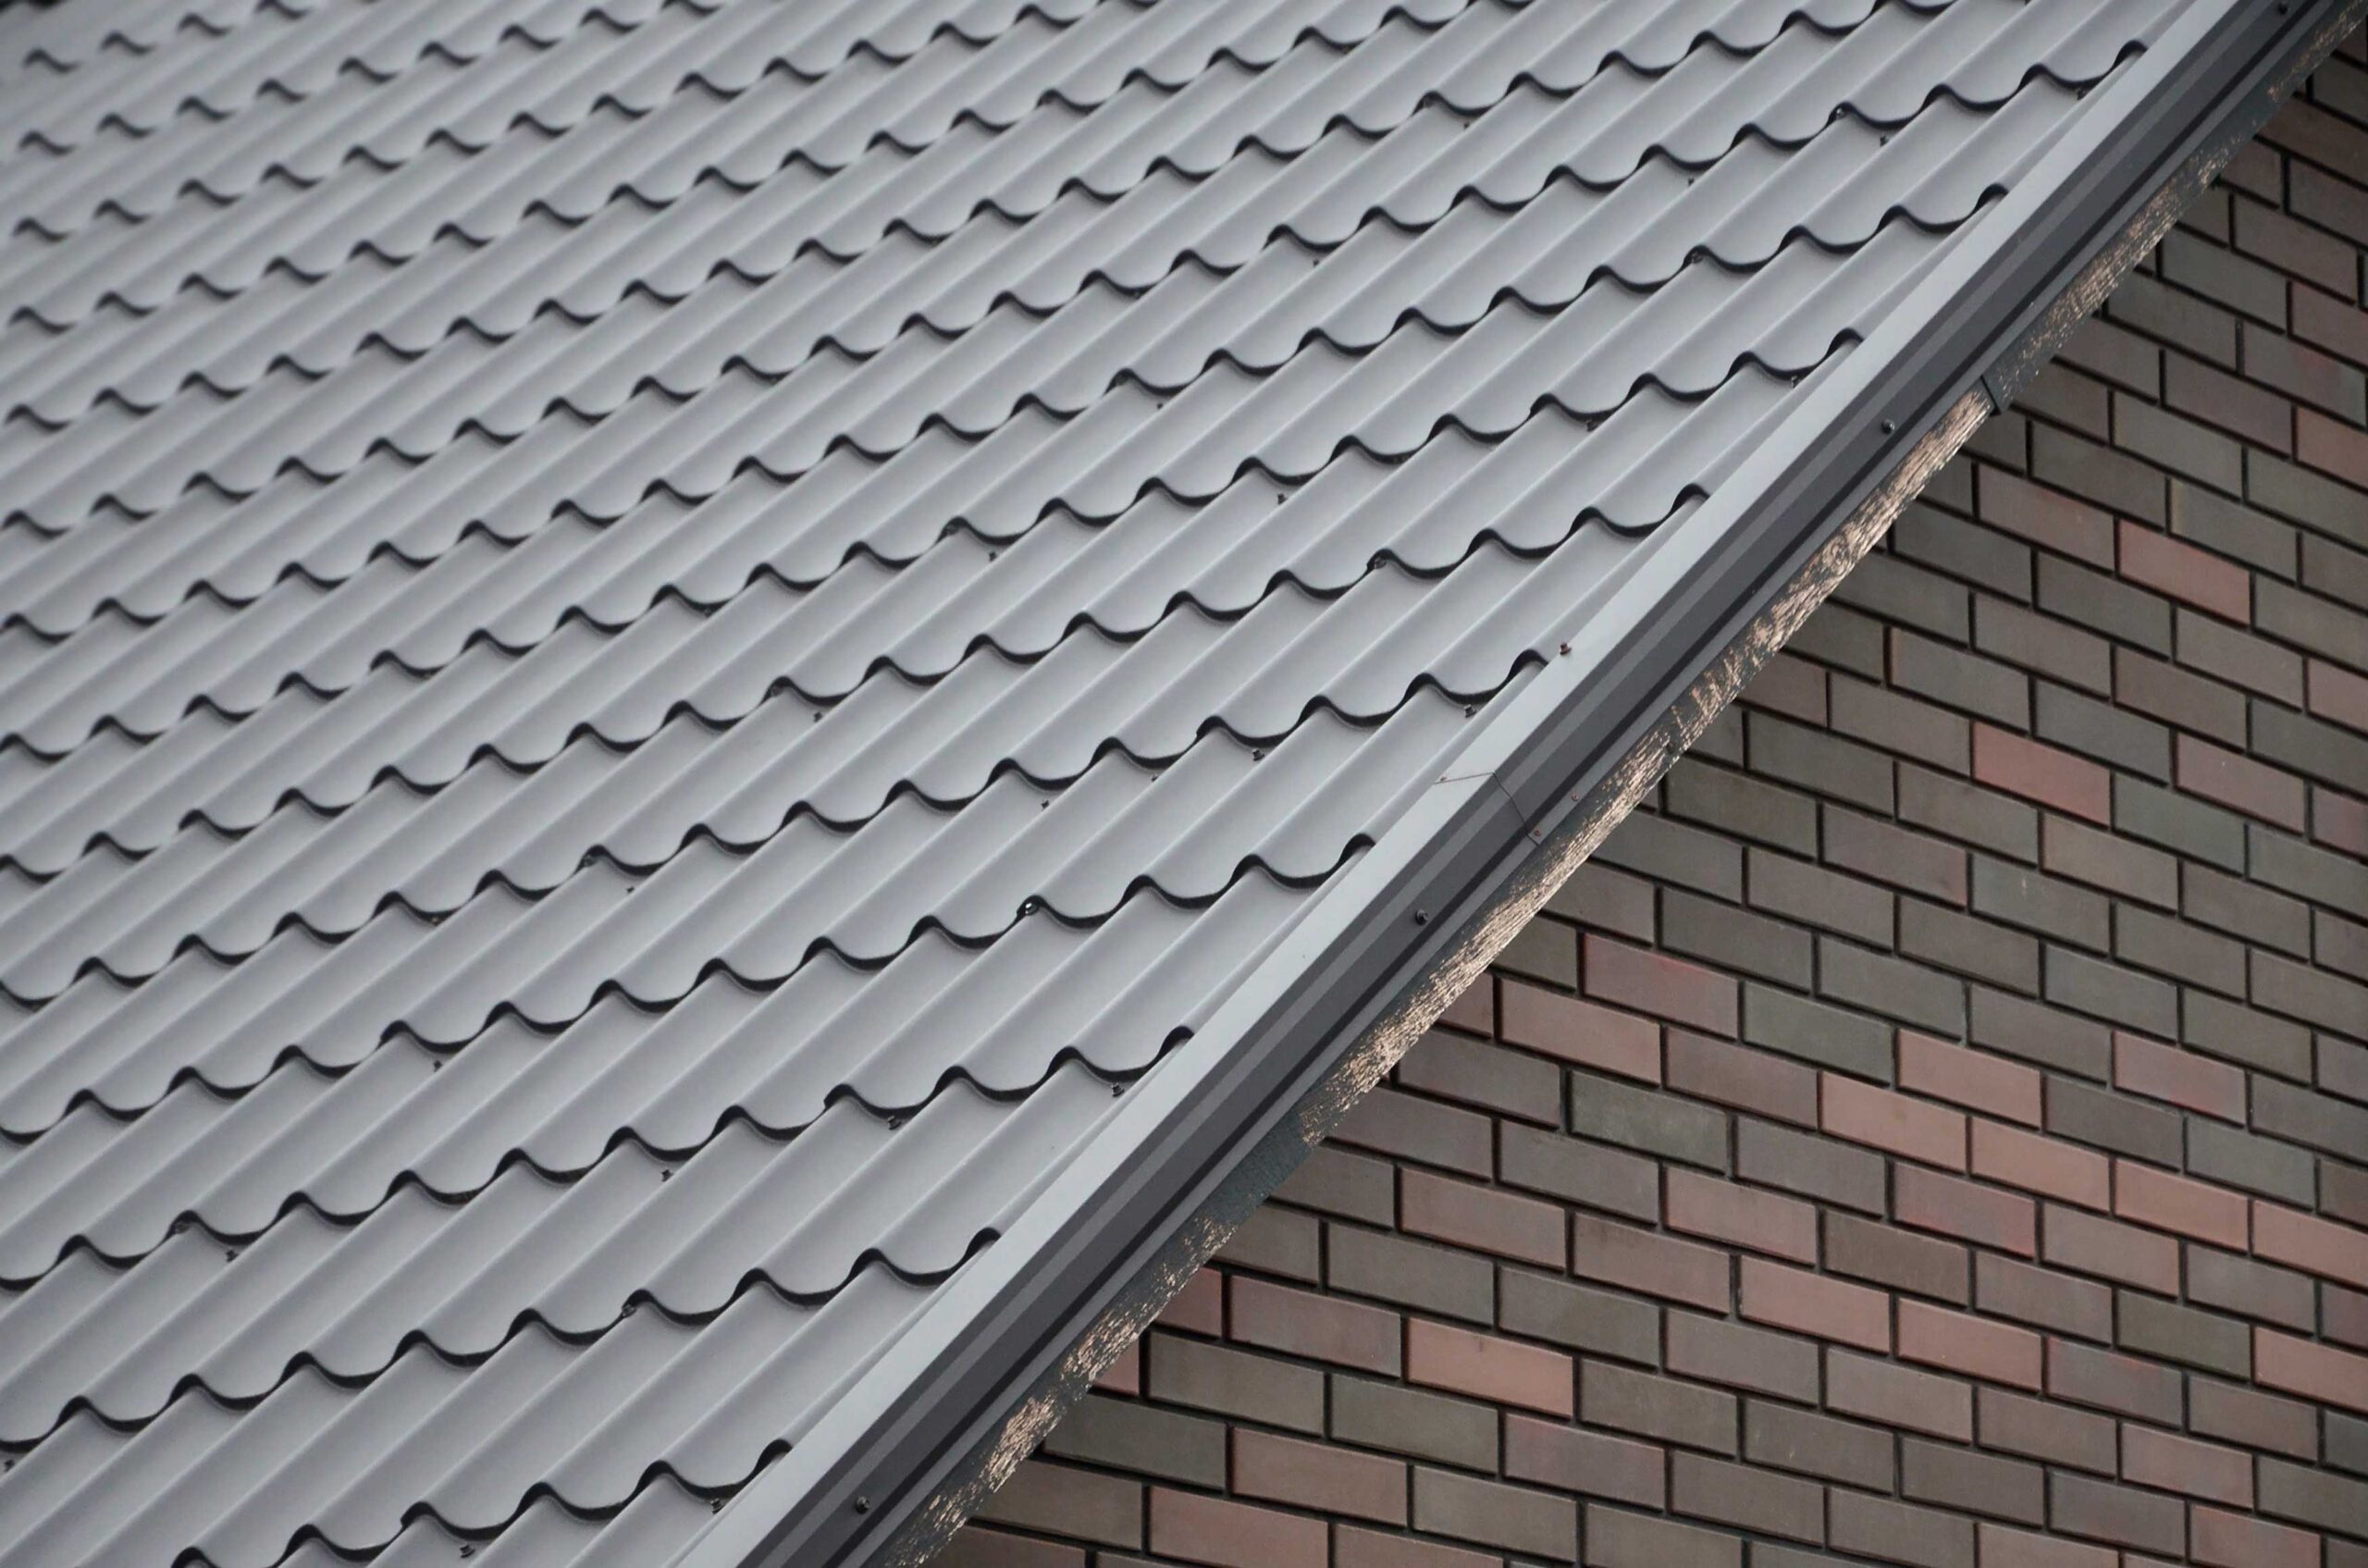 Diagonal composition of grey metal roof tiles meeting a wall with red and black brick pattern, showing the contrast between the two textures.